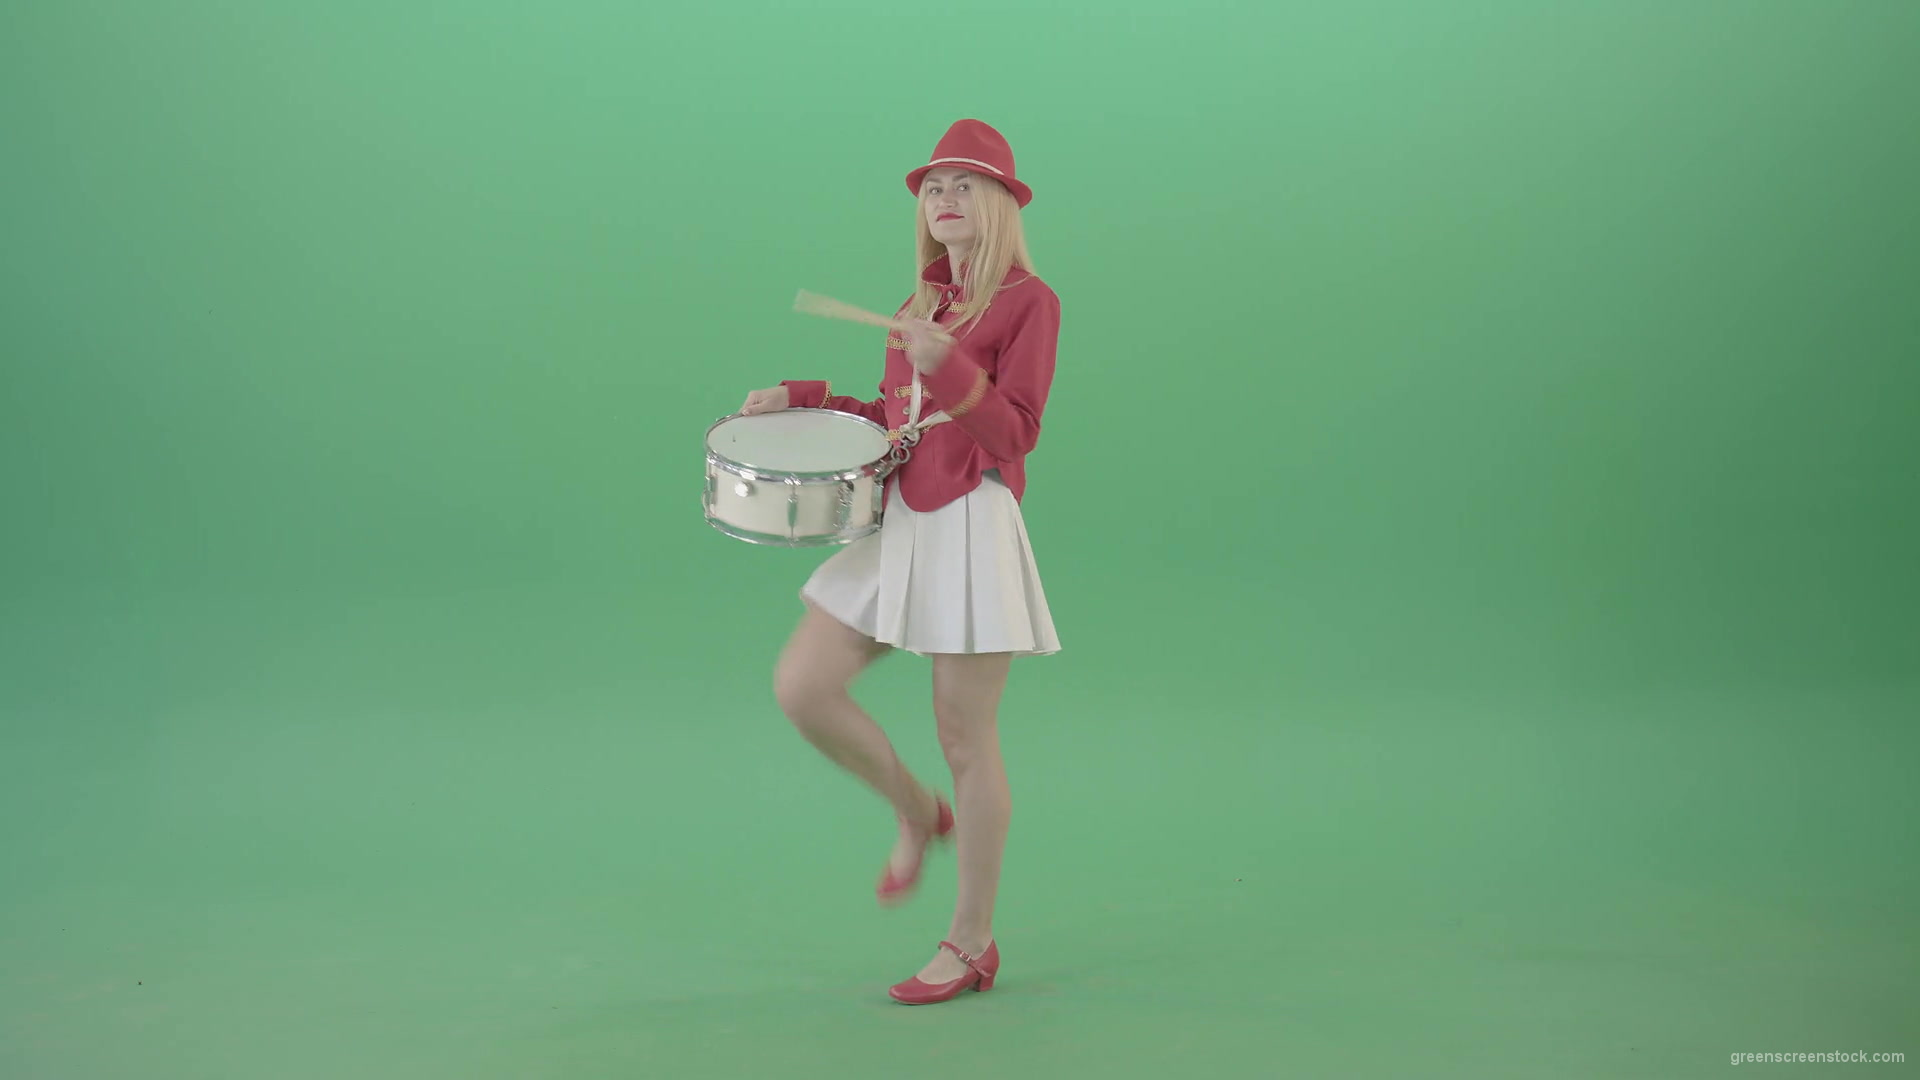 Girl-in-red-uniform-marching-and-play-snare-drum-on-green-screen-4K-Video-Footage-1920_006 Green Screen Stock